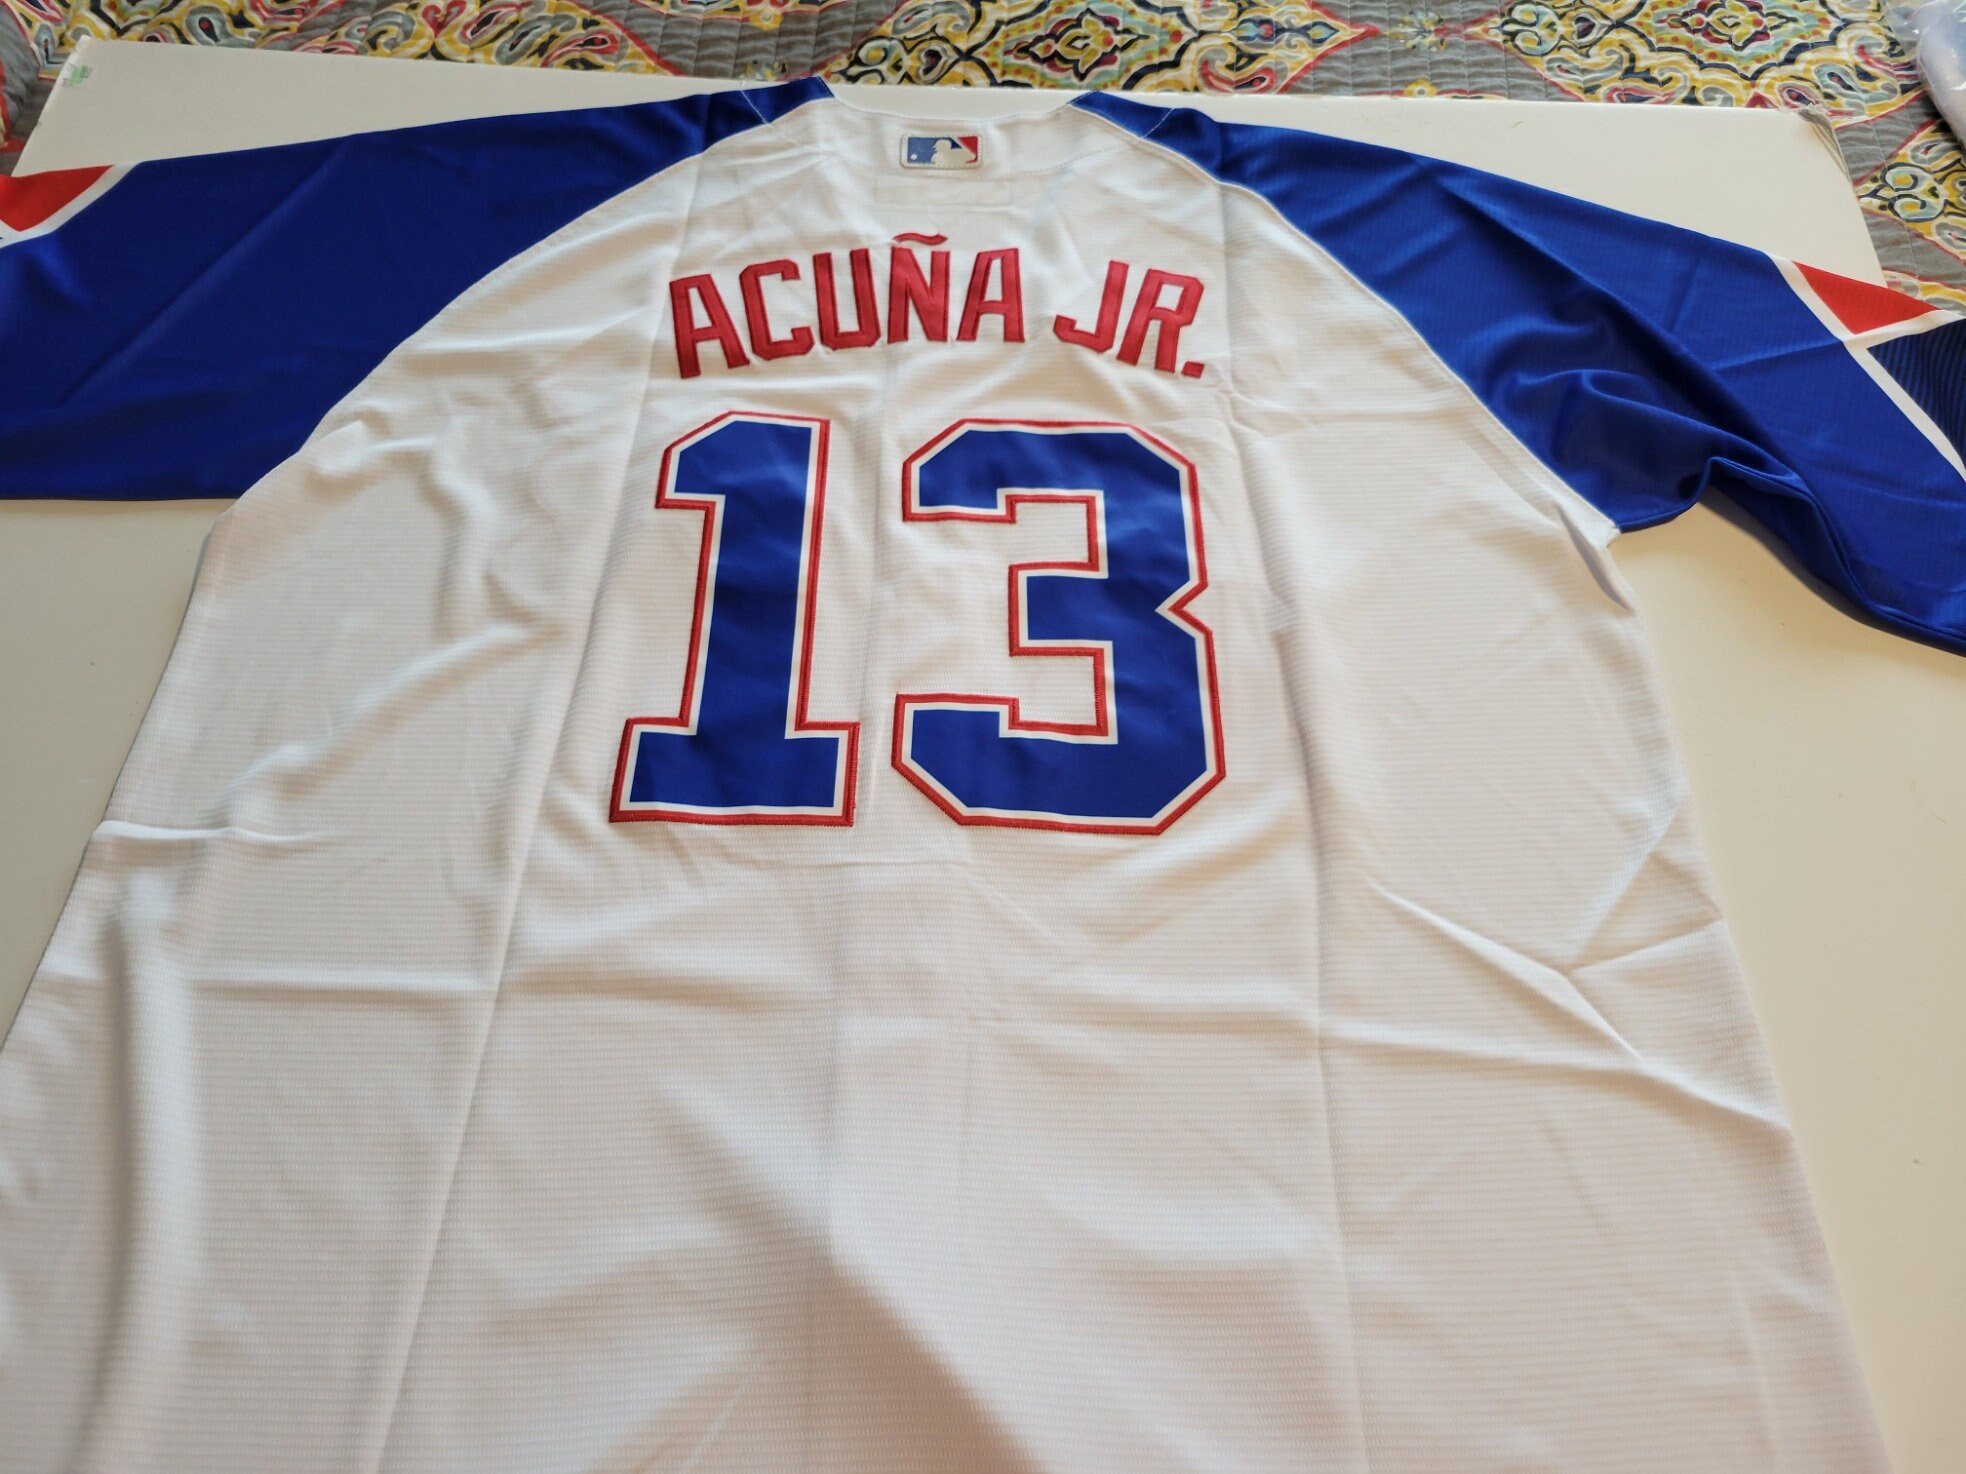 Ronald Acuña Jr ÑVP signature Shirt - Bring Your Ideas, Thoughts